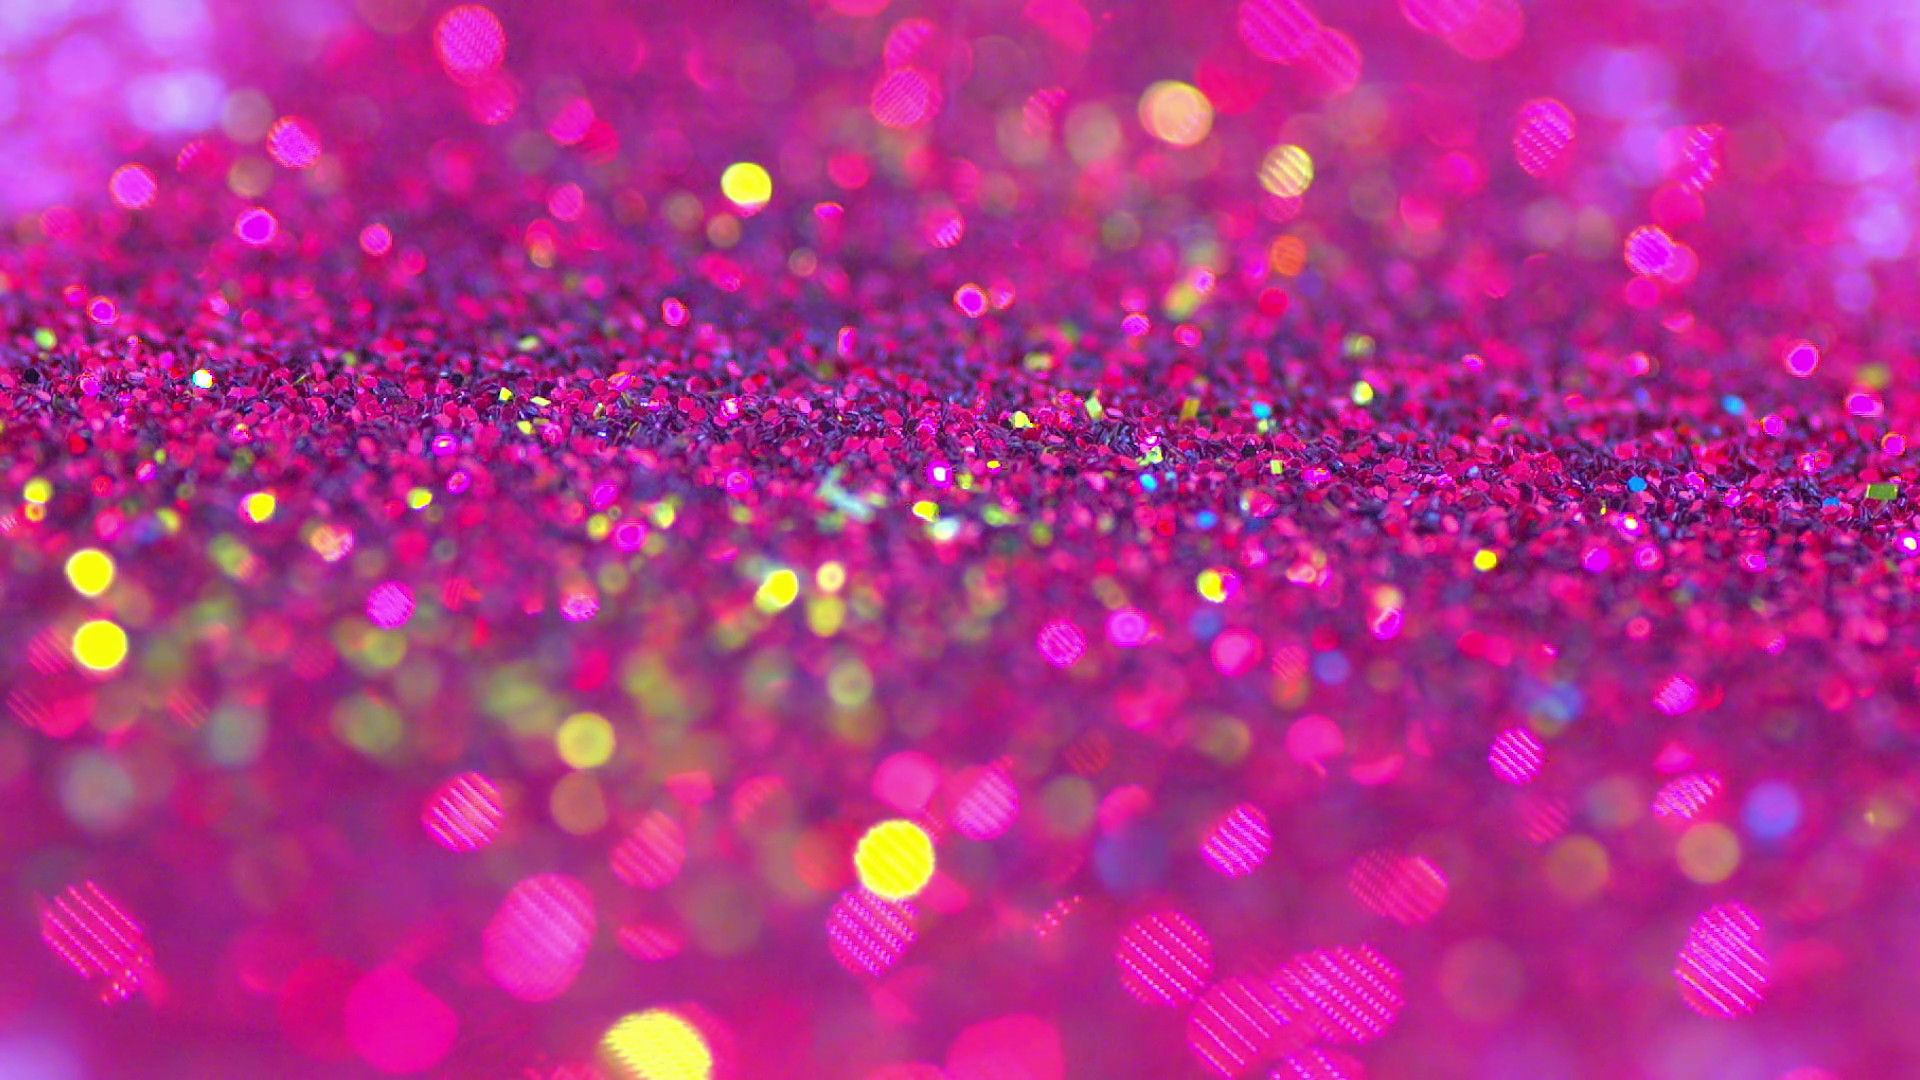 1920x1080   Sparkly pink glitter background in bright colors. Great  party background texture Stock Video Footage